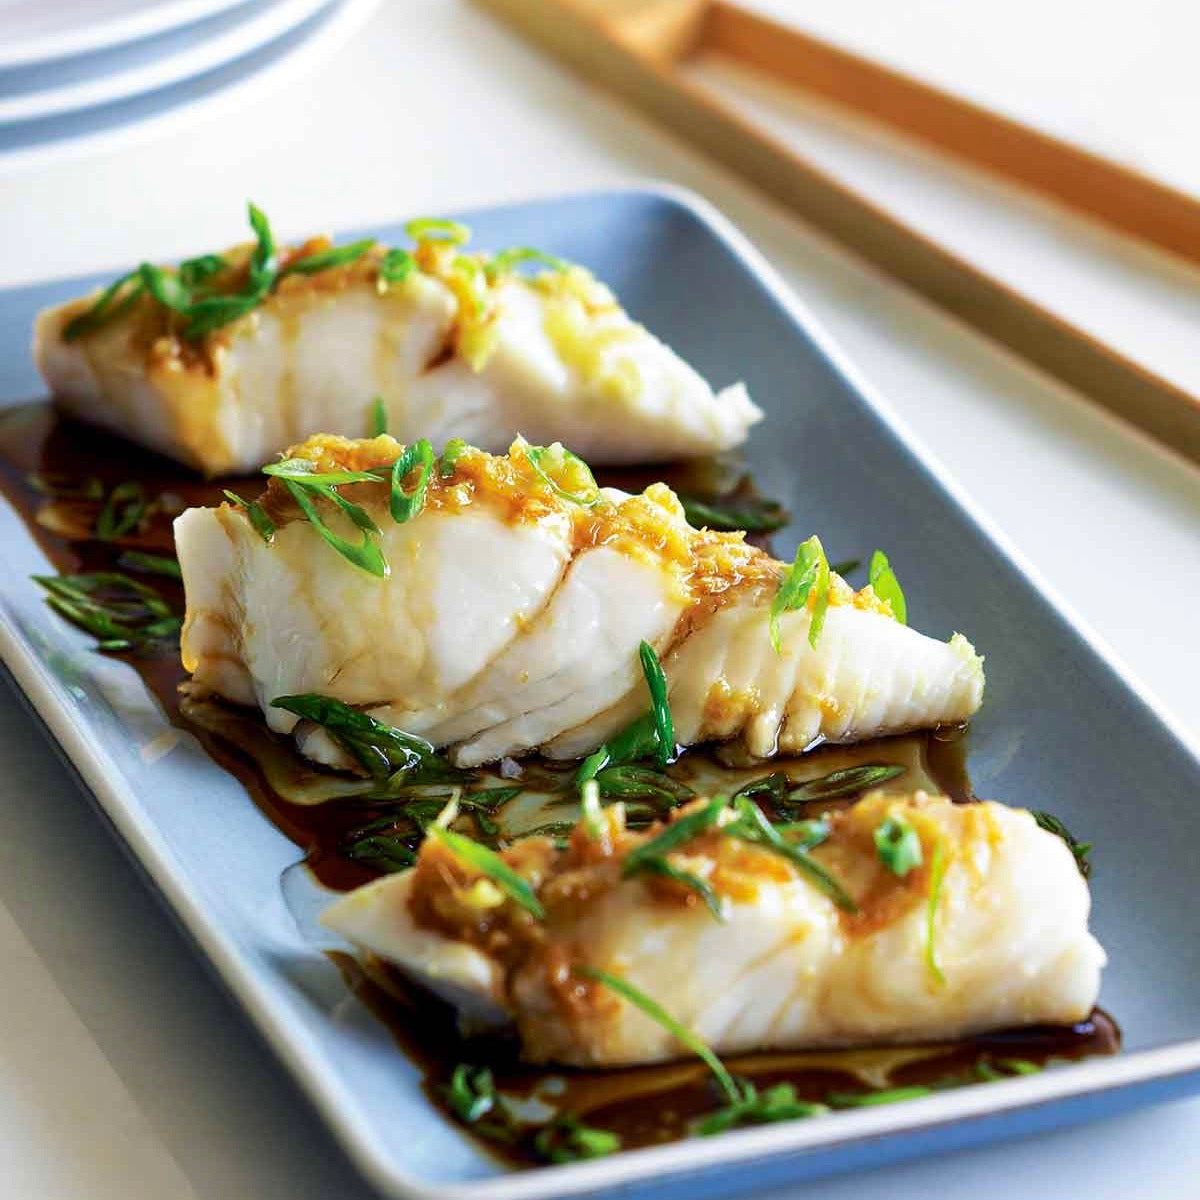 Buy Halibut Fillet in Singapore - The New Grocer